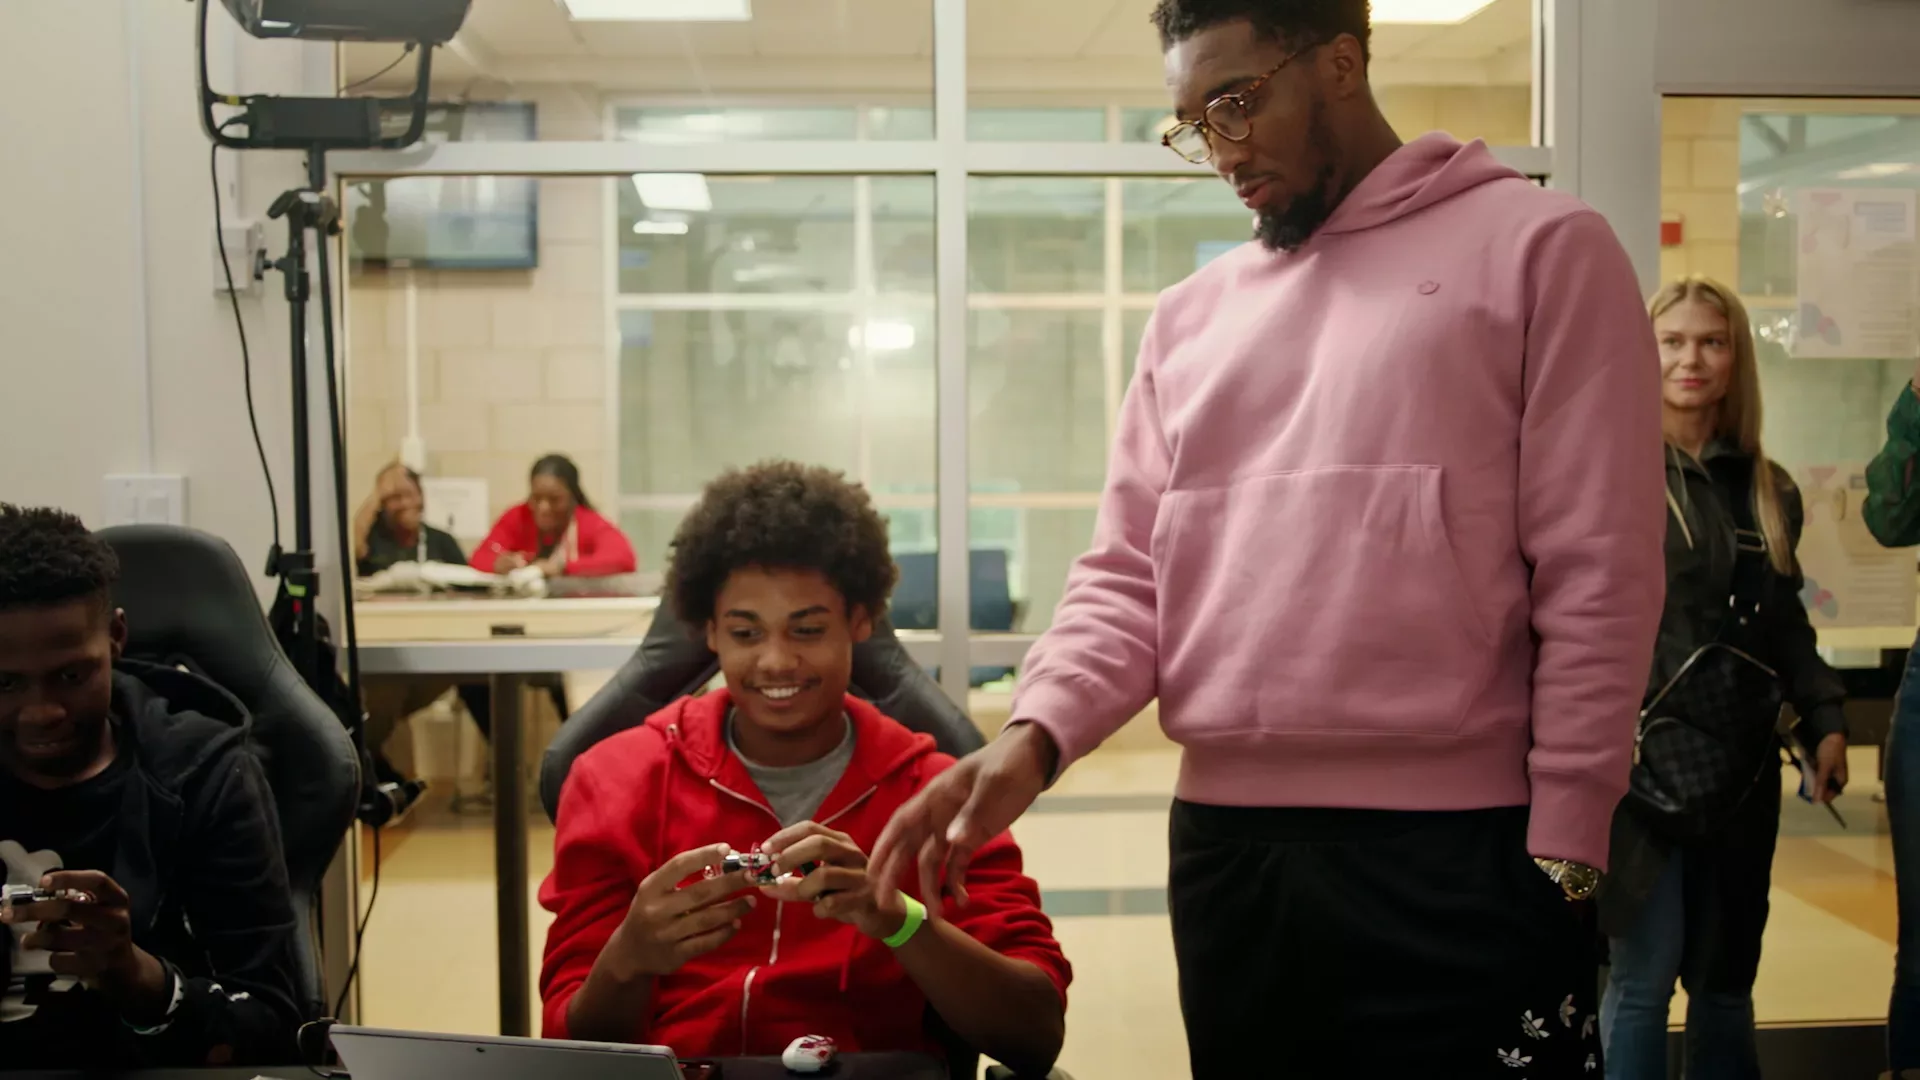 NBA star Donovan Mitchell stands over a student seated at a computer table. The student holds a computing device and is smiling.